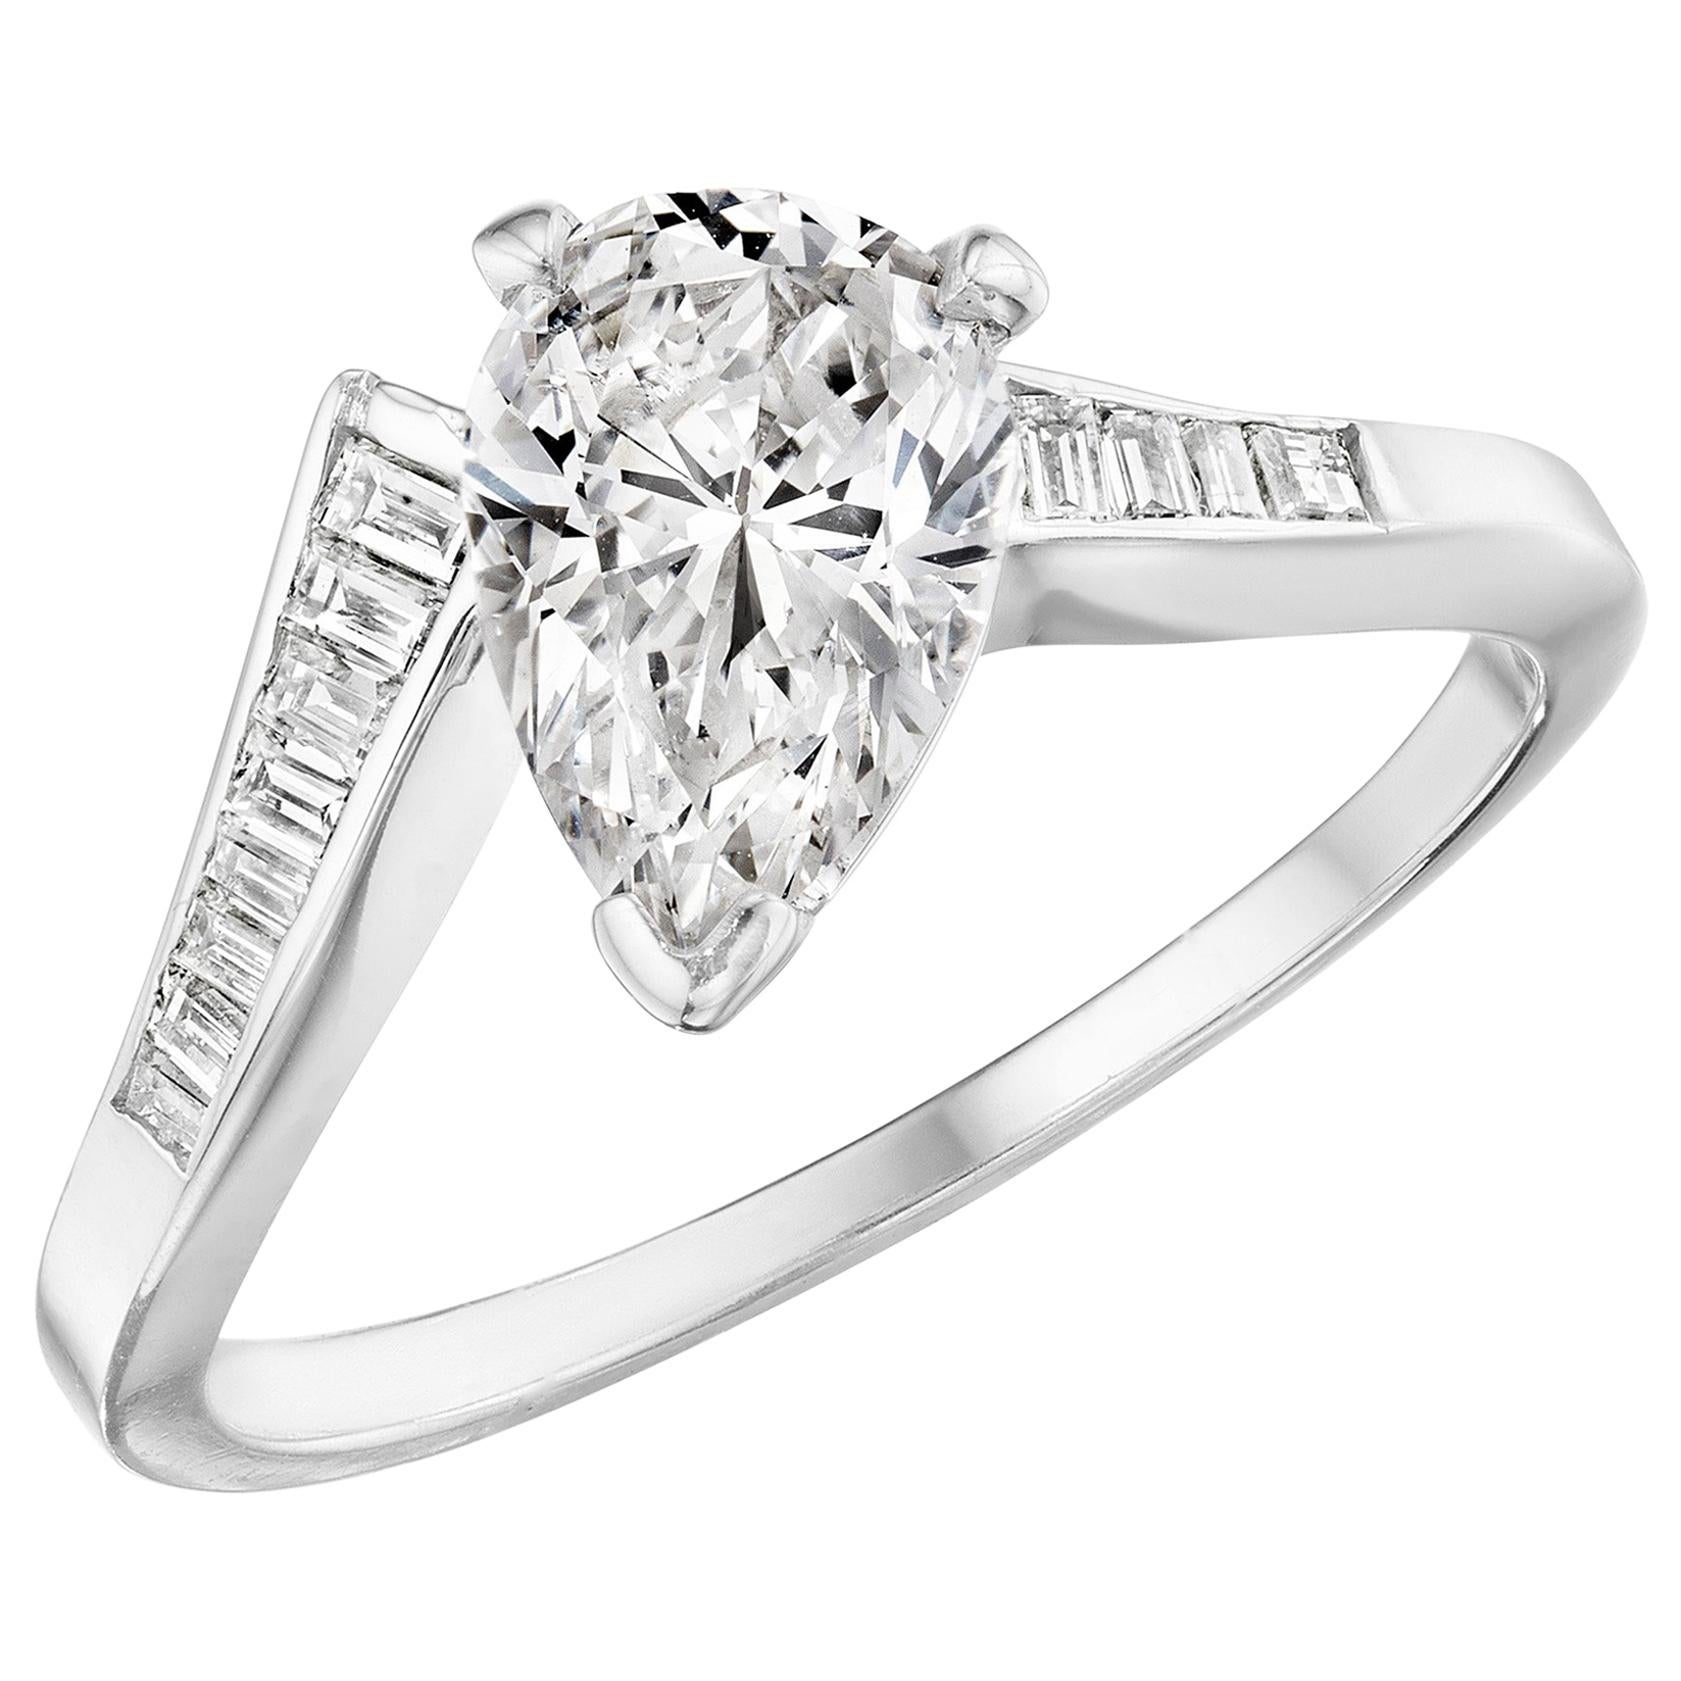 1.09 Carat Pear Diamond Ring with Baguette Side Diamonds in 14 Karat White Gold For Sale